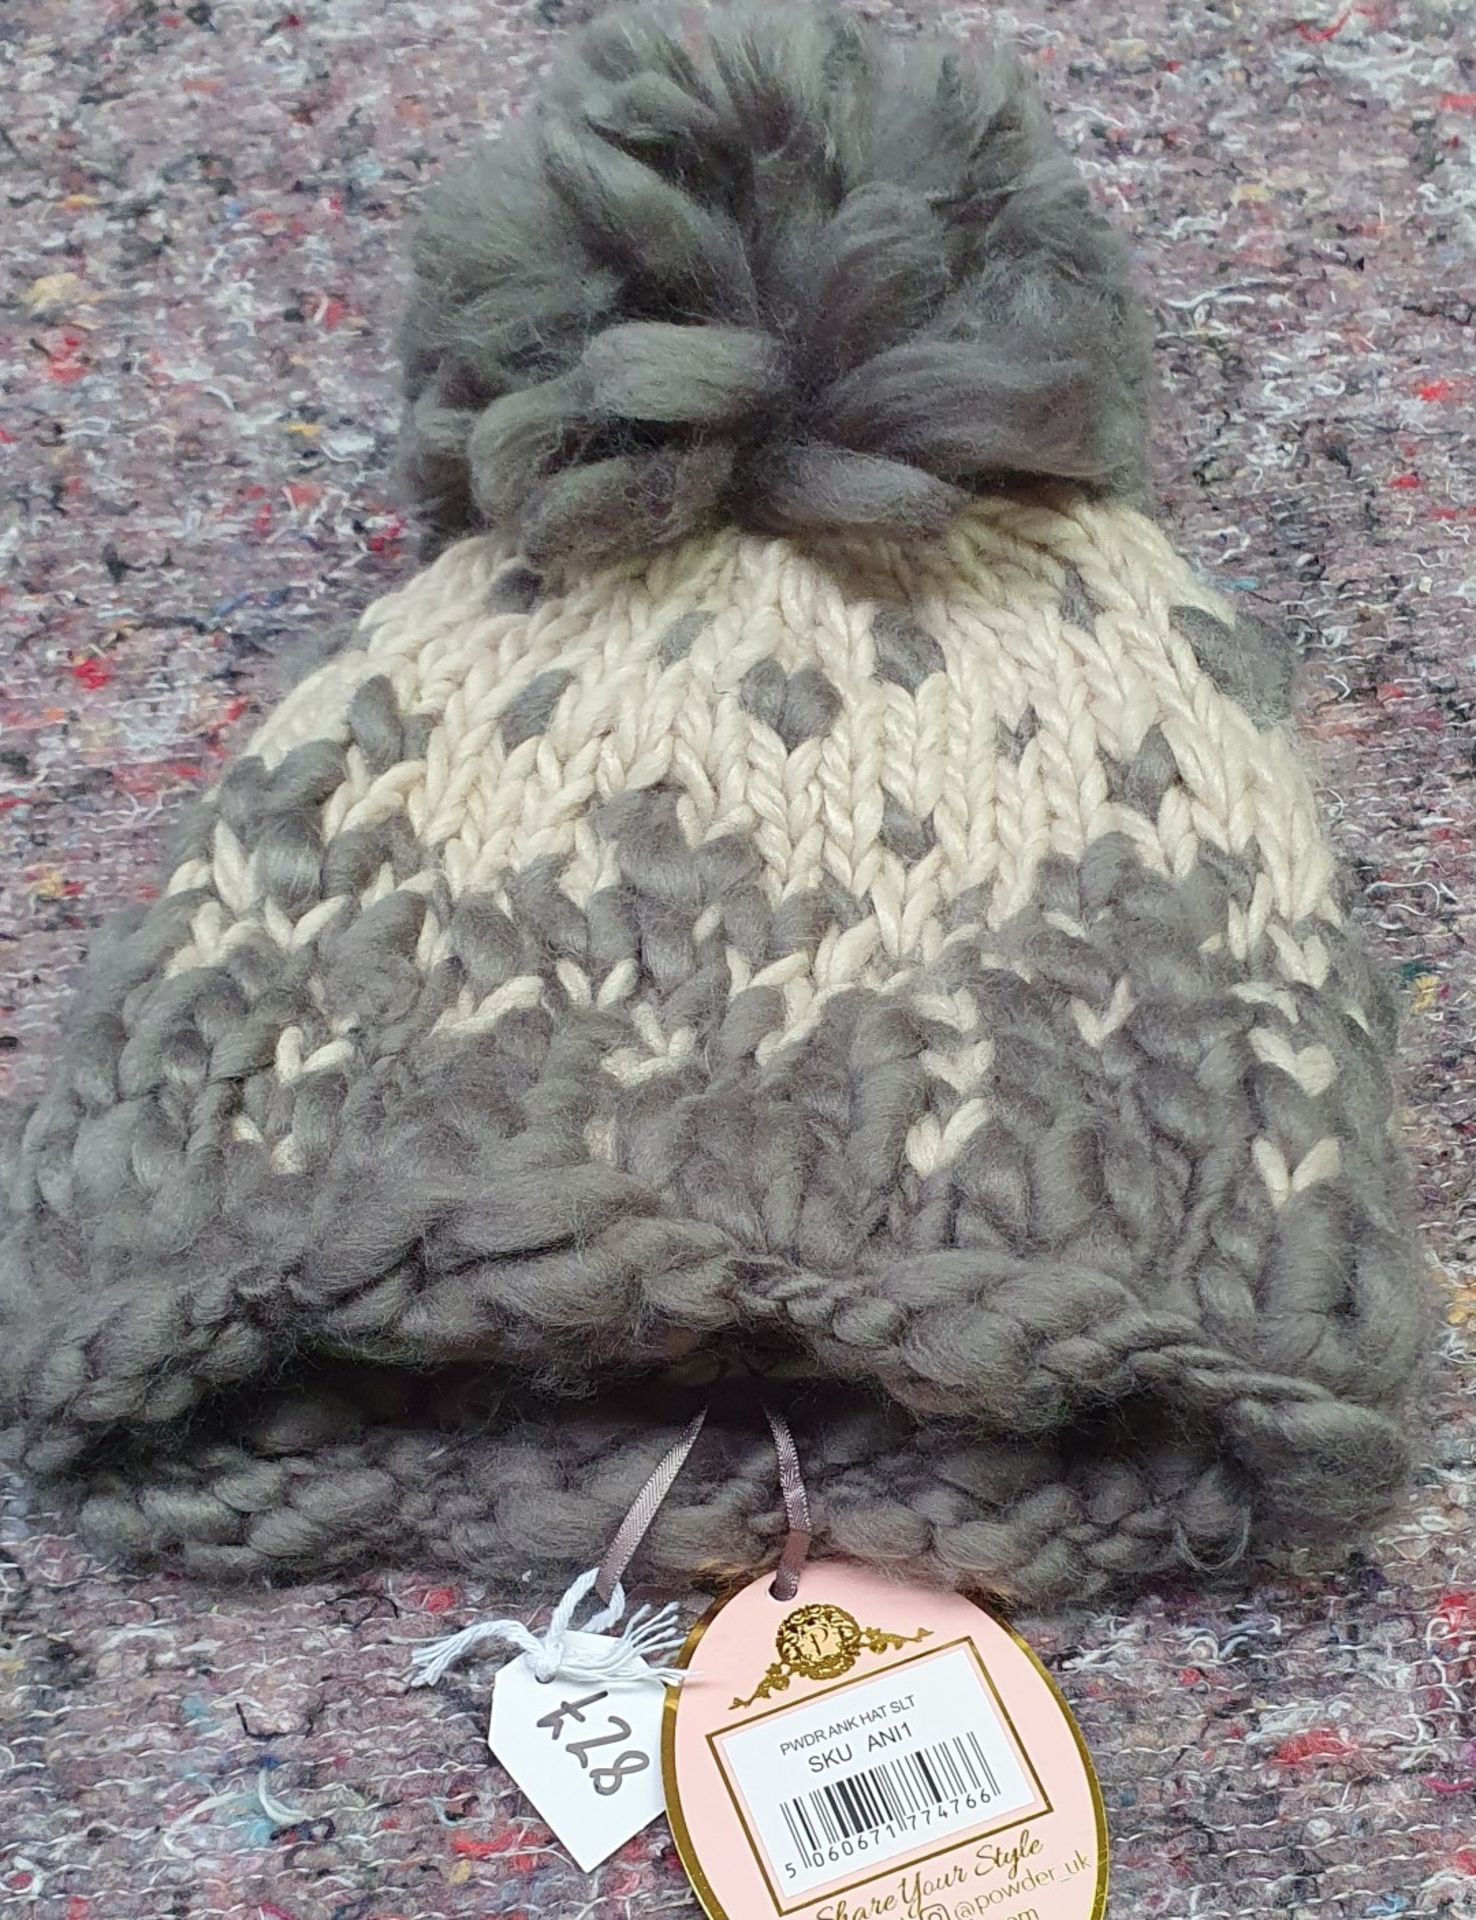 13 x Assorted Bobble Hats and Woolly Gloves by From The Source - New Stock - Ref: TCH236 - CL840 - - Image 7 of 24